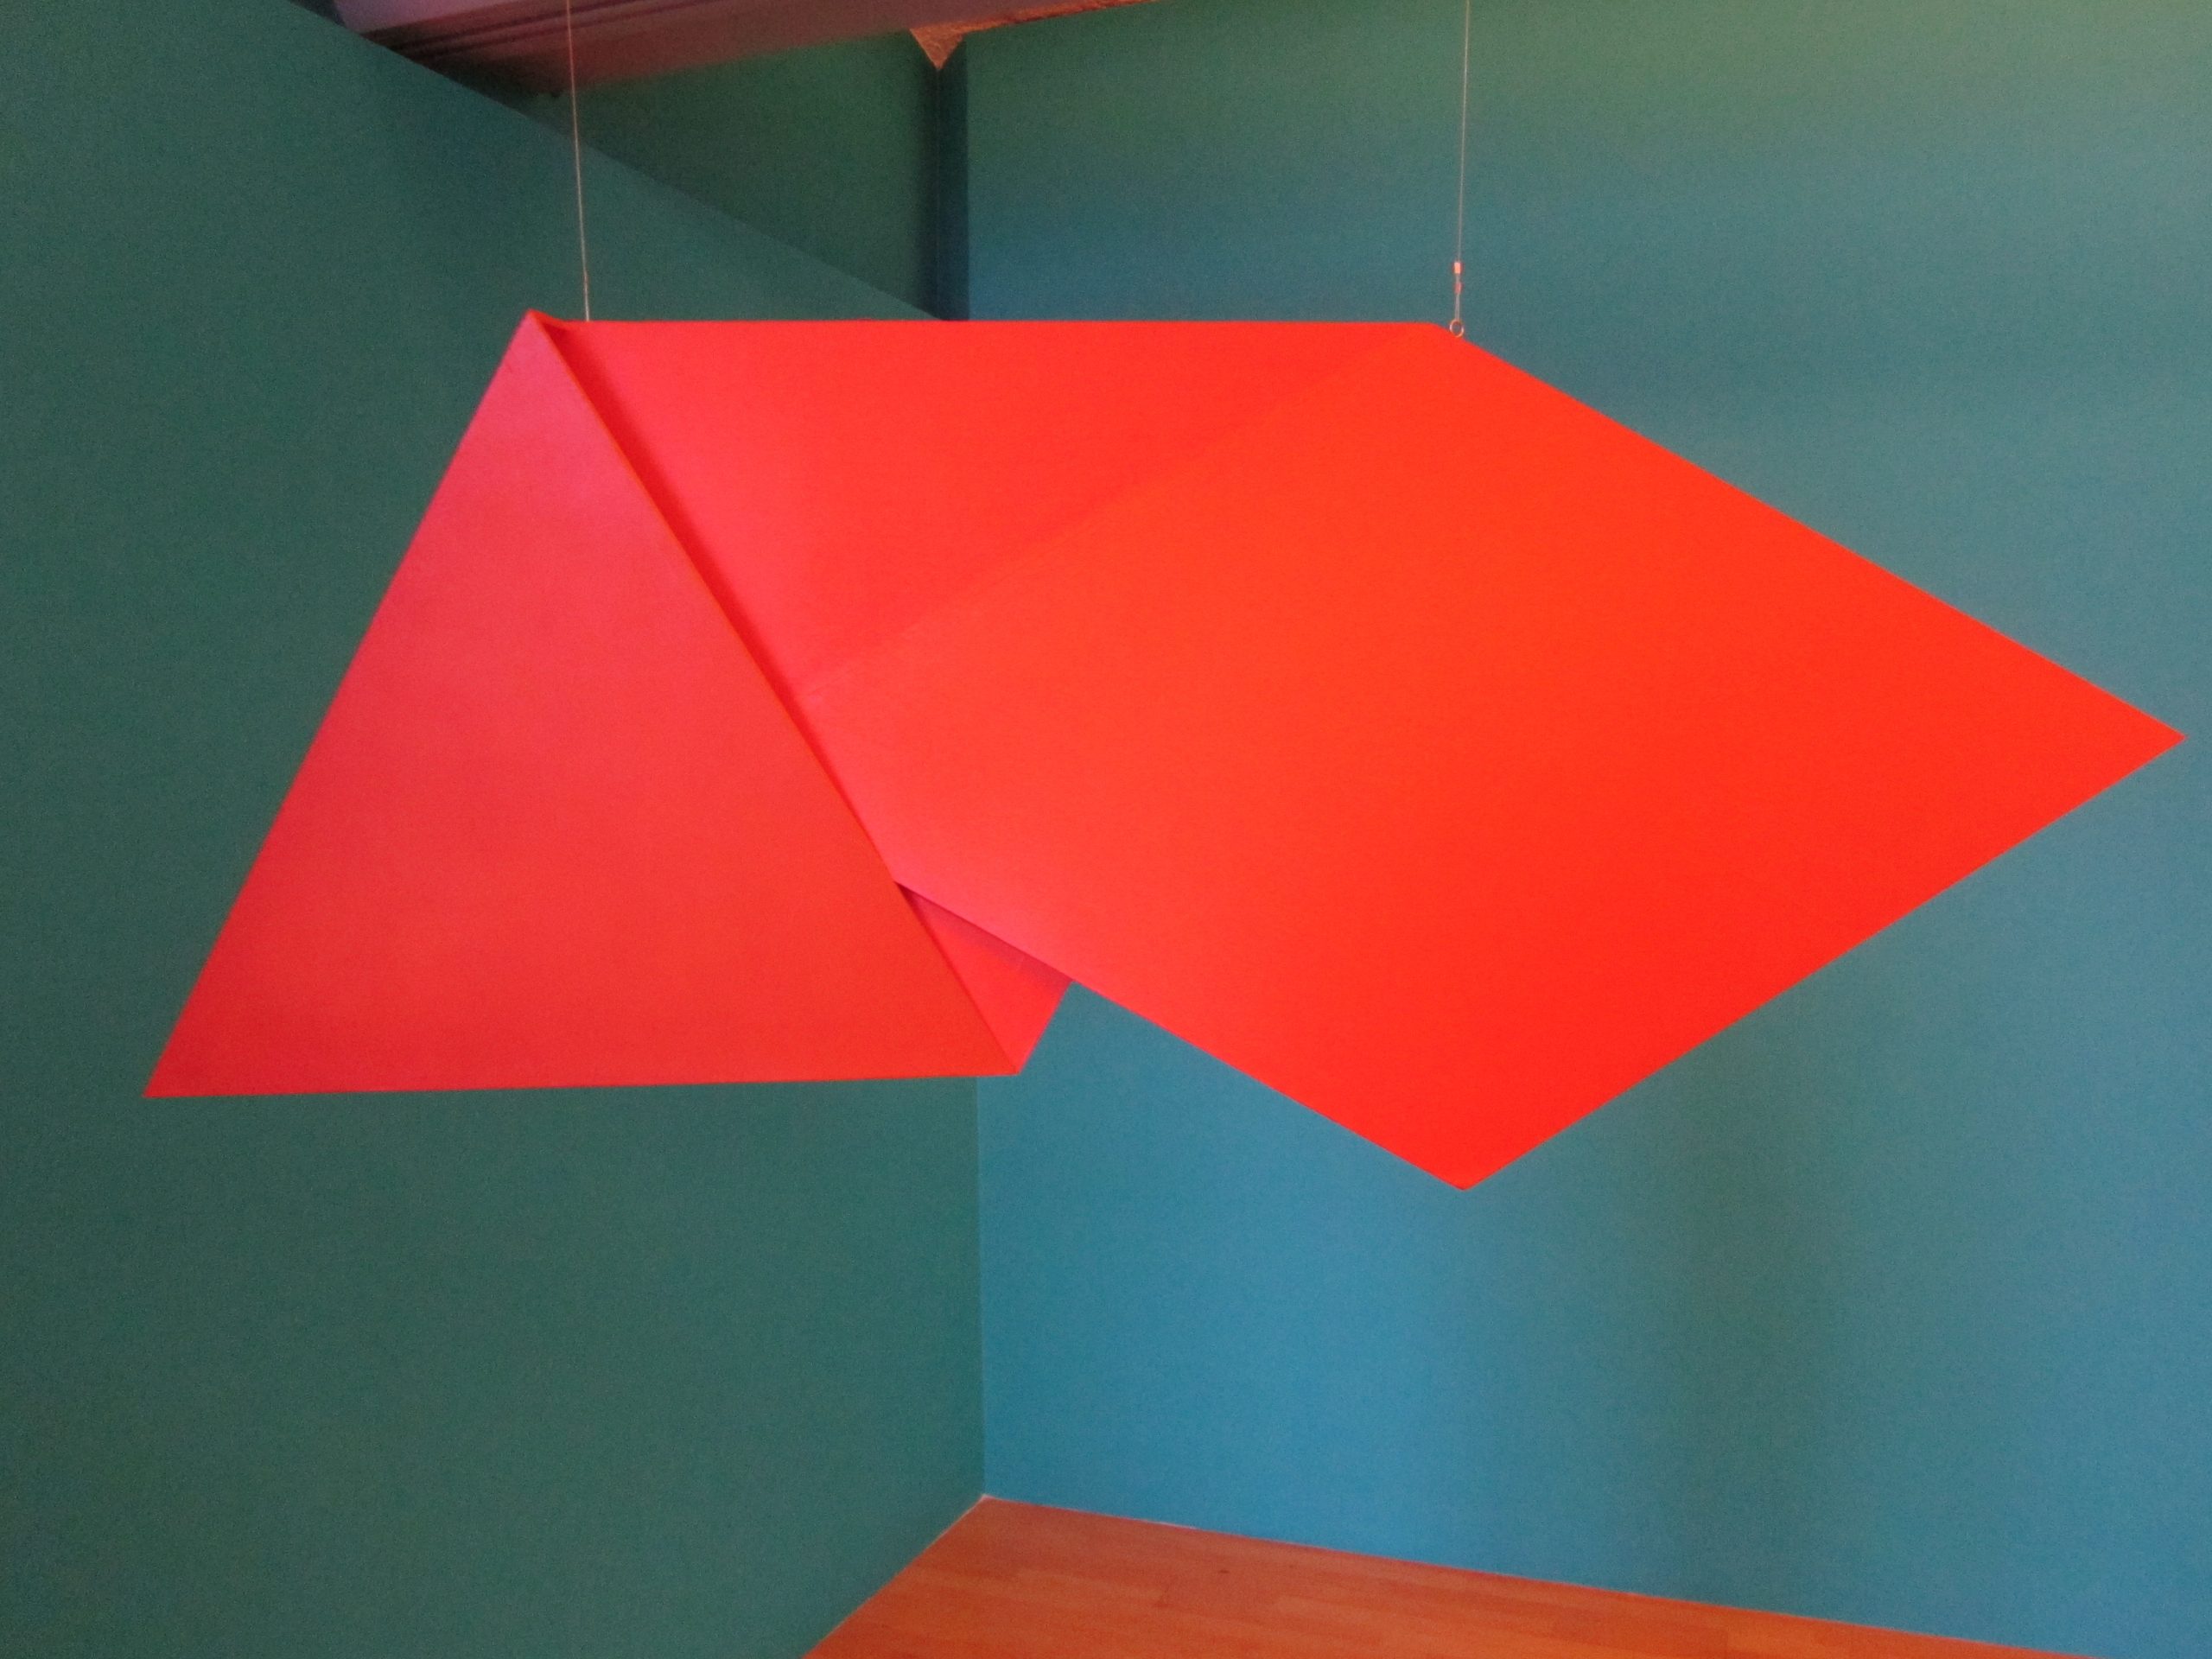 A red panel hanging from the ceiling, with the edges folded in on itself in a few different angles.